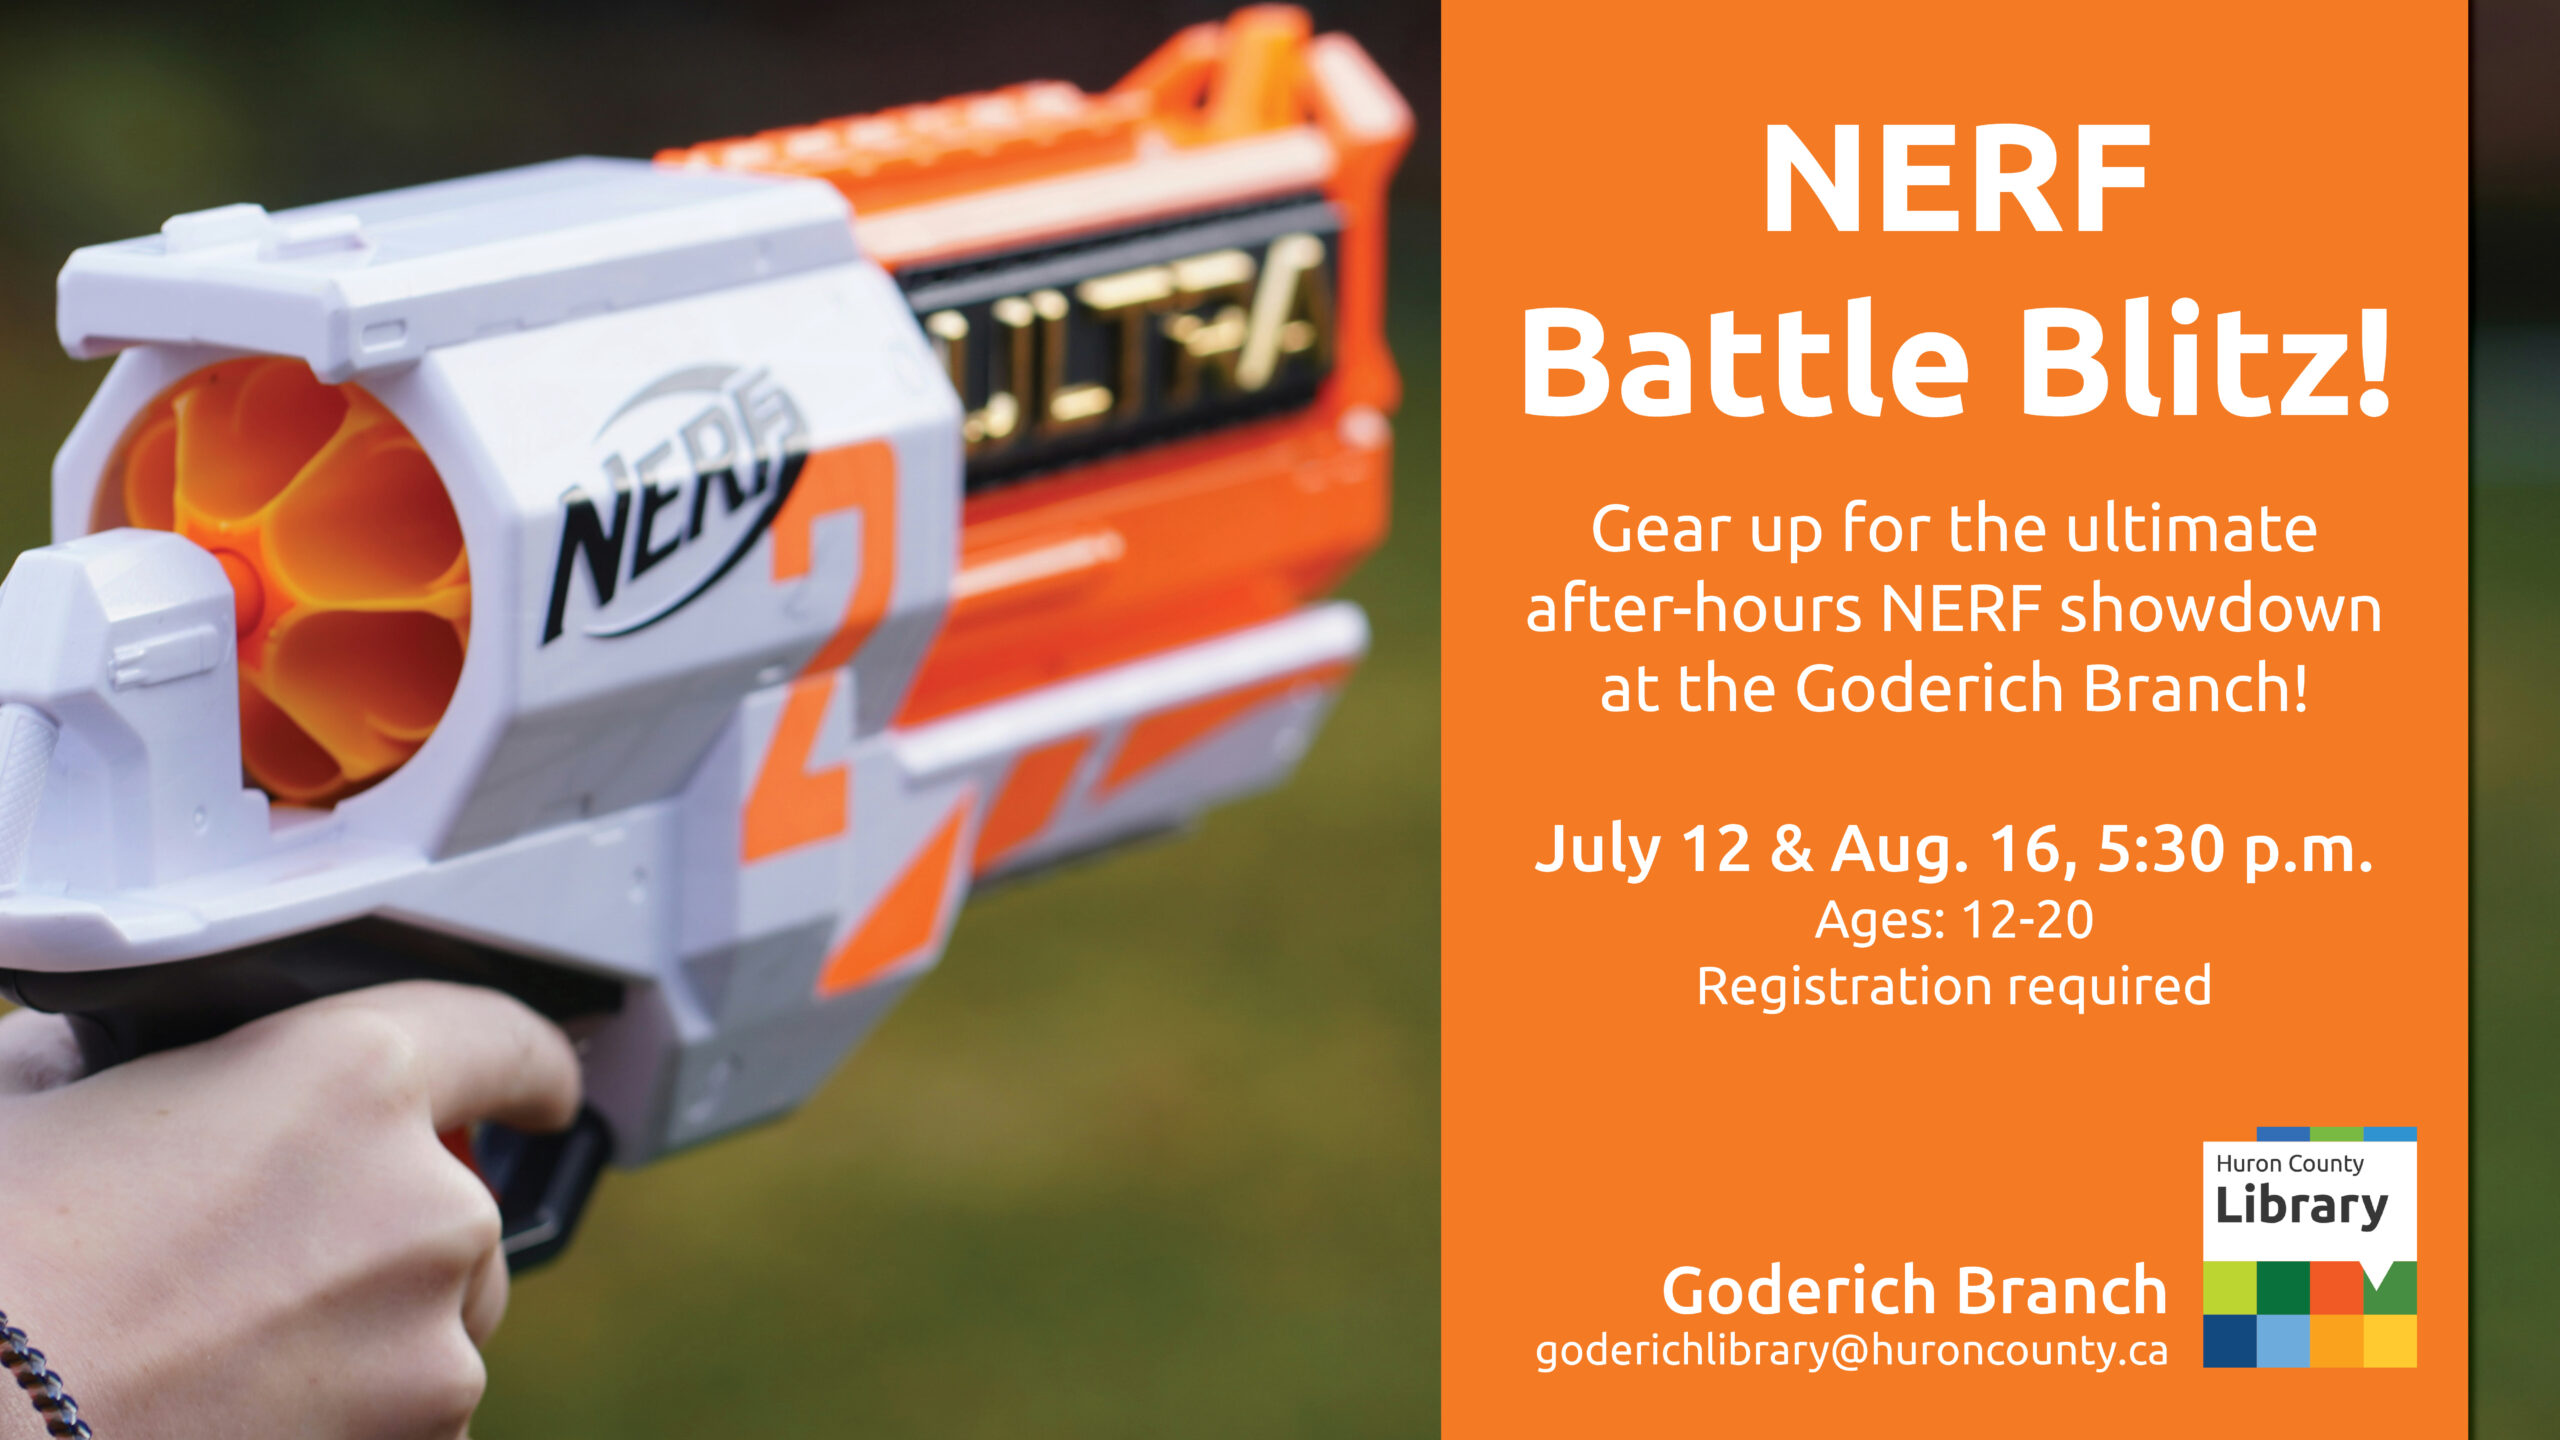 Photo of a nerf gun with text promoting Nerf Battle Blitz at Goderich